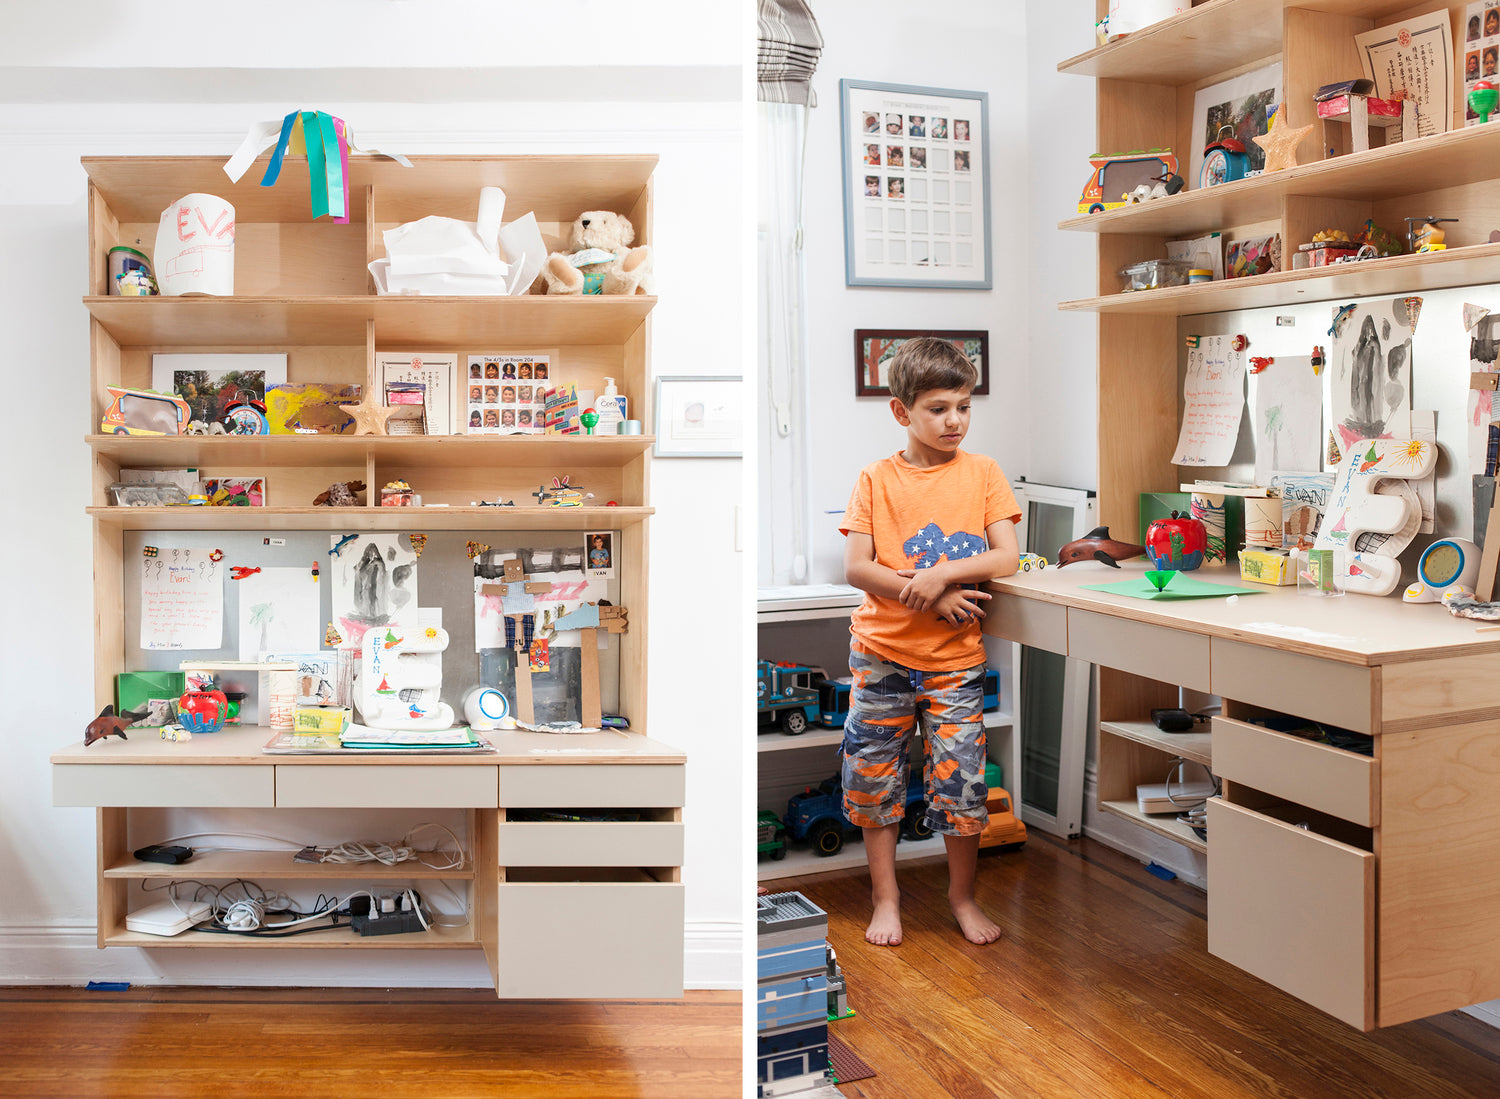 Before-and-after of a shelf, cluttered then organized, with child.